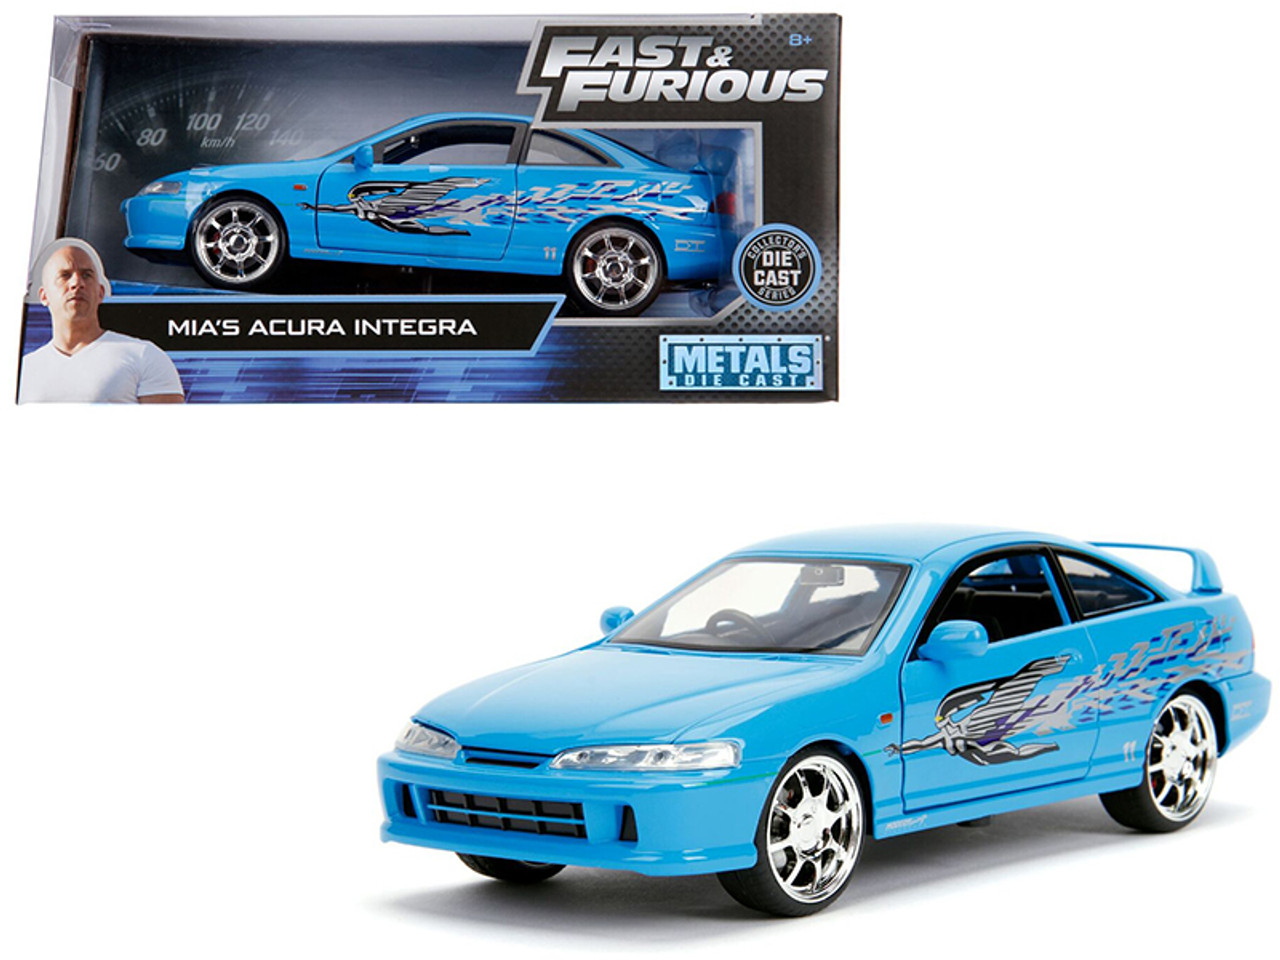 1/24 Mia's Acura Integra RHD (Right Hand Drive) Blue "The Fast and the Furious" Movie Diecast Model Car